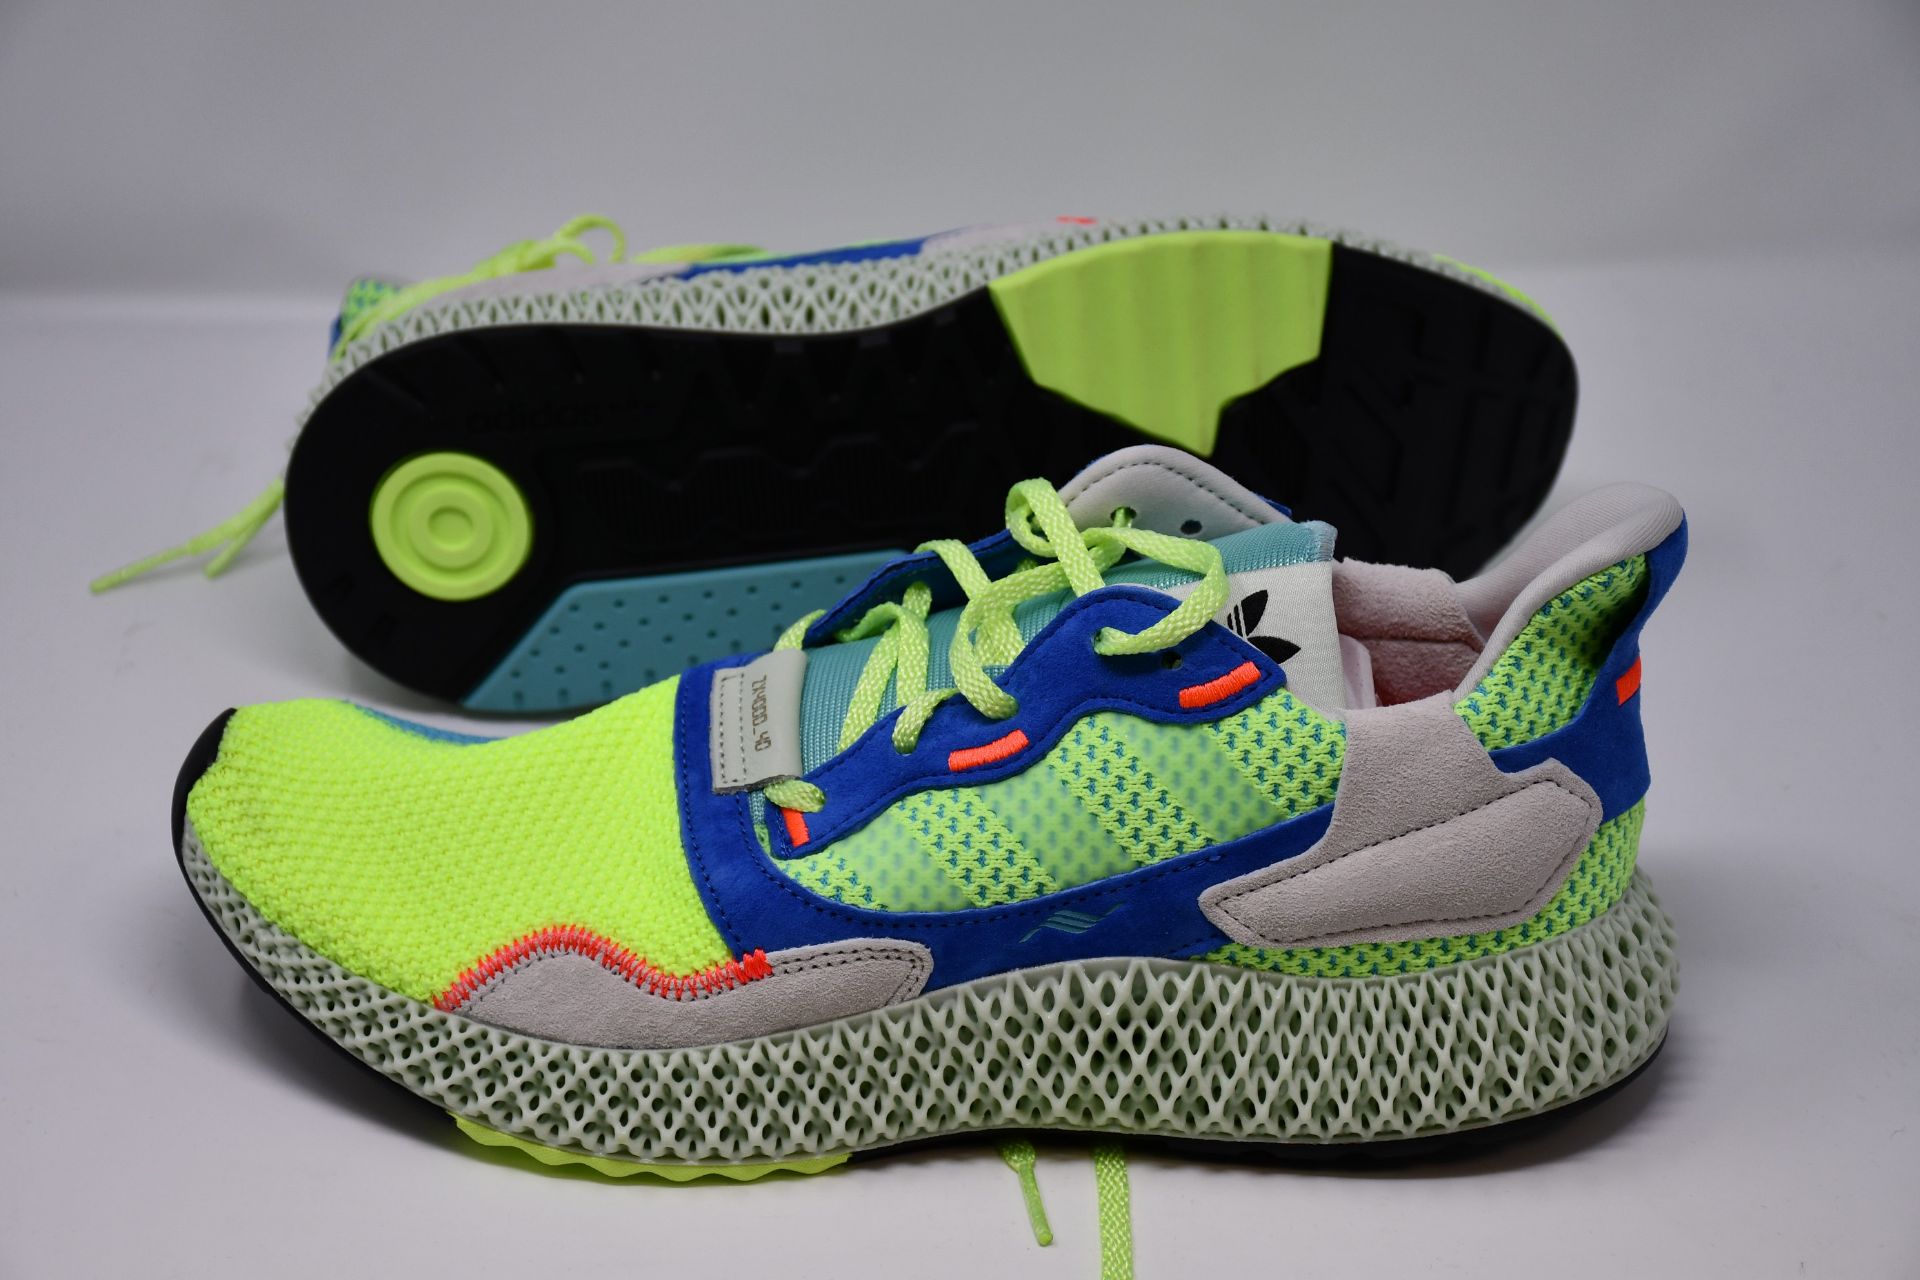 A pair of Adidas ZX 4000 4D trainers (UK 11).